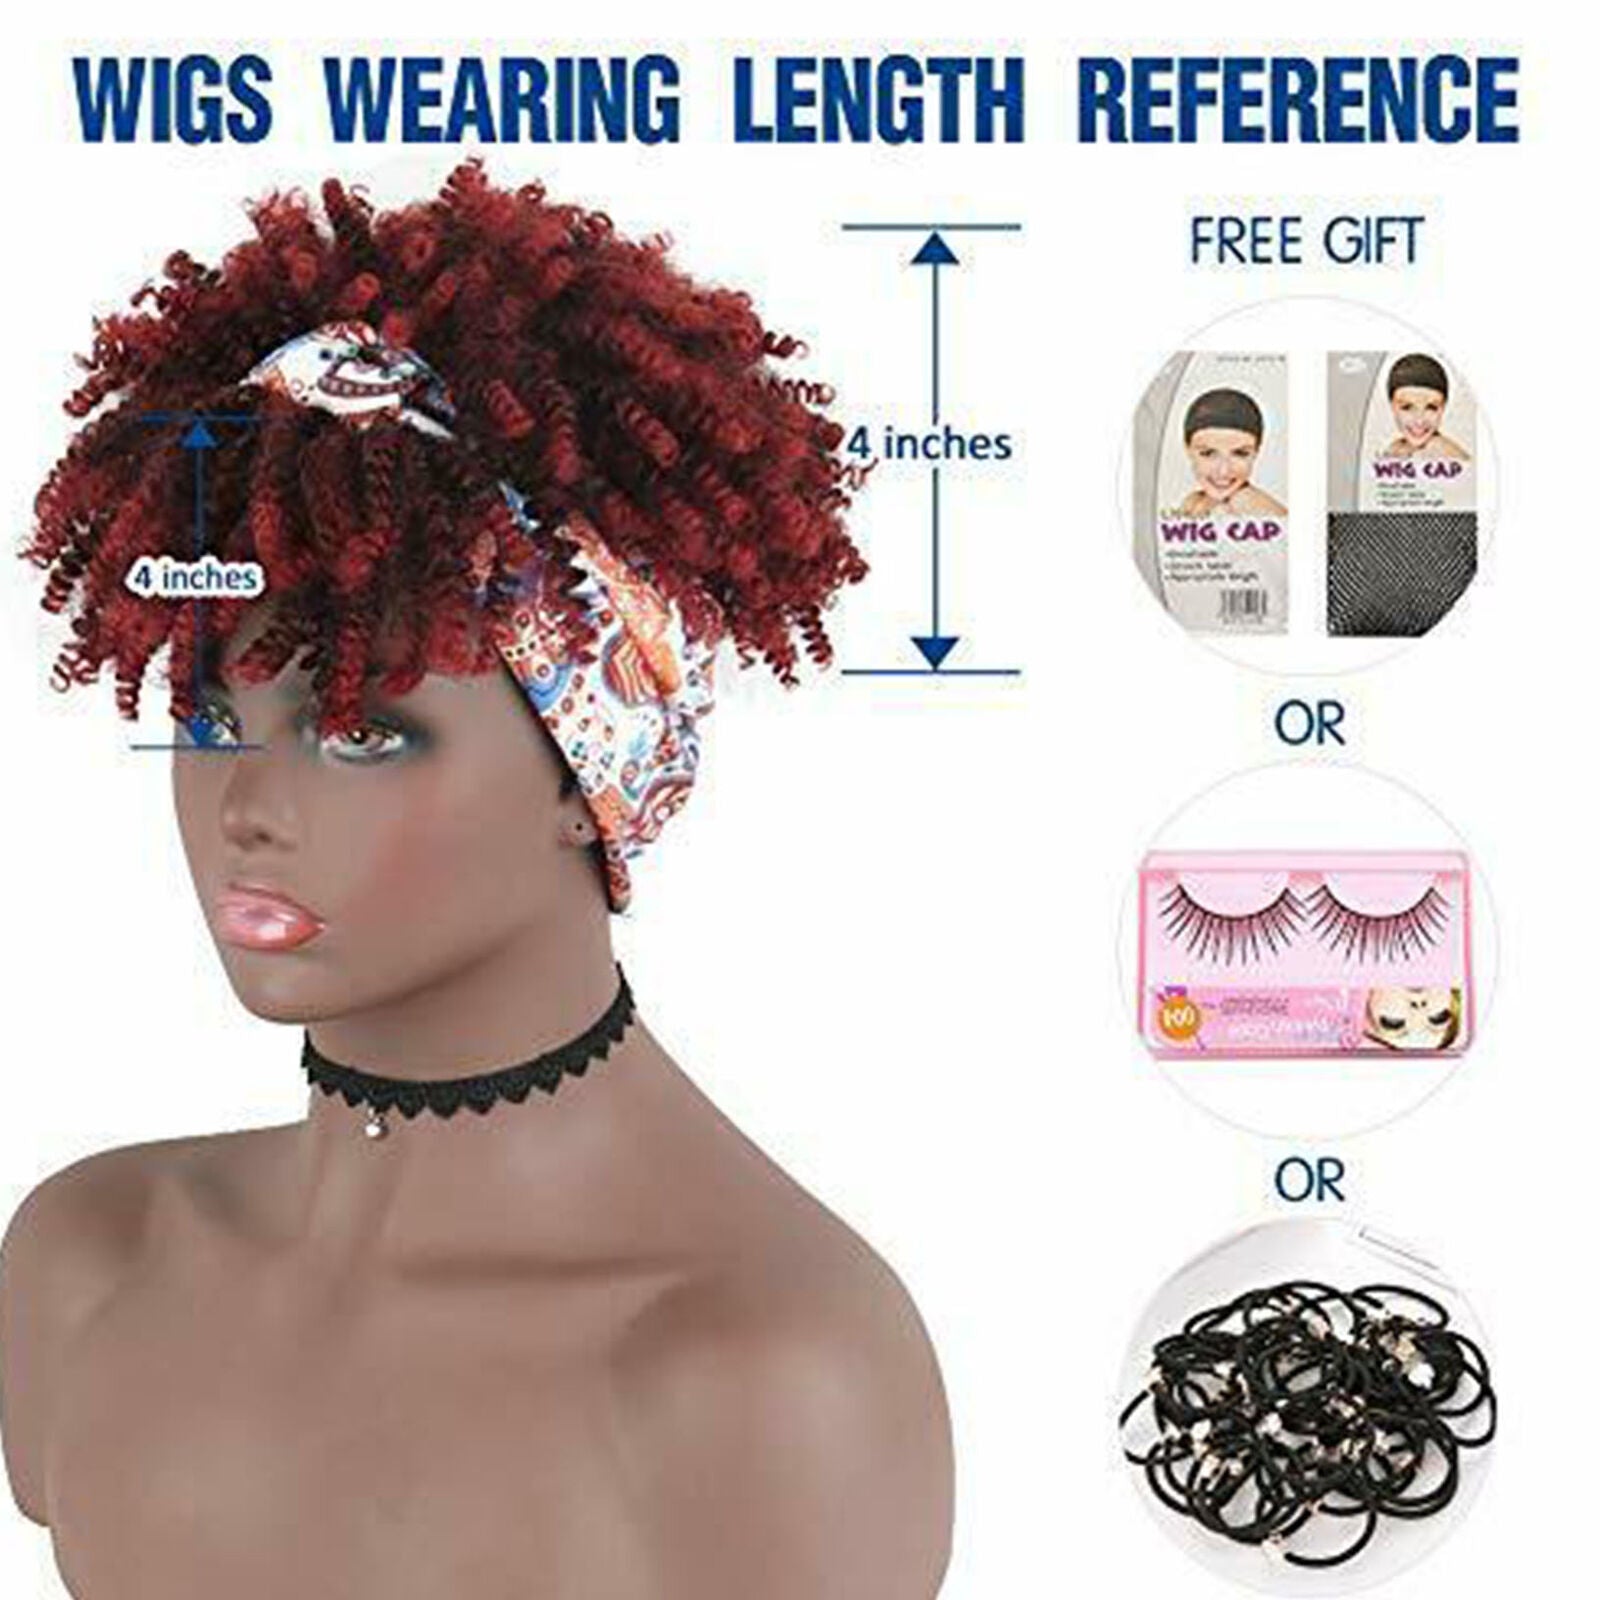 Short Red Kinky Curly Headband Wigs for Women,Afro Curly Headband Wig